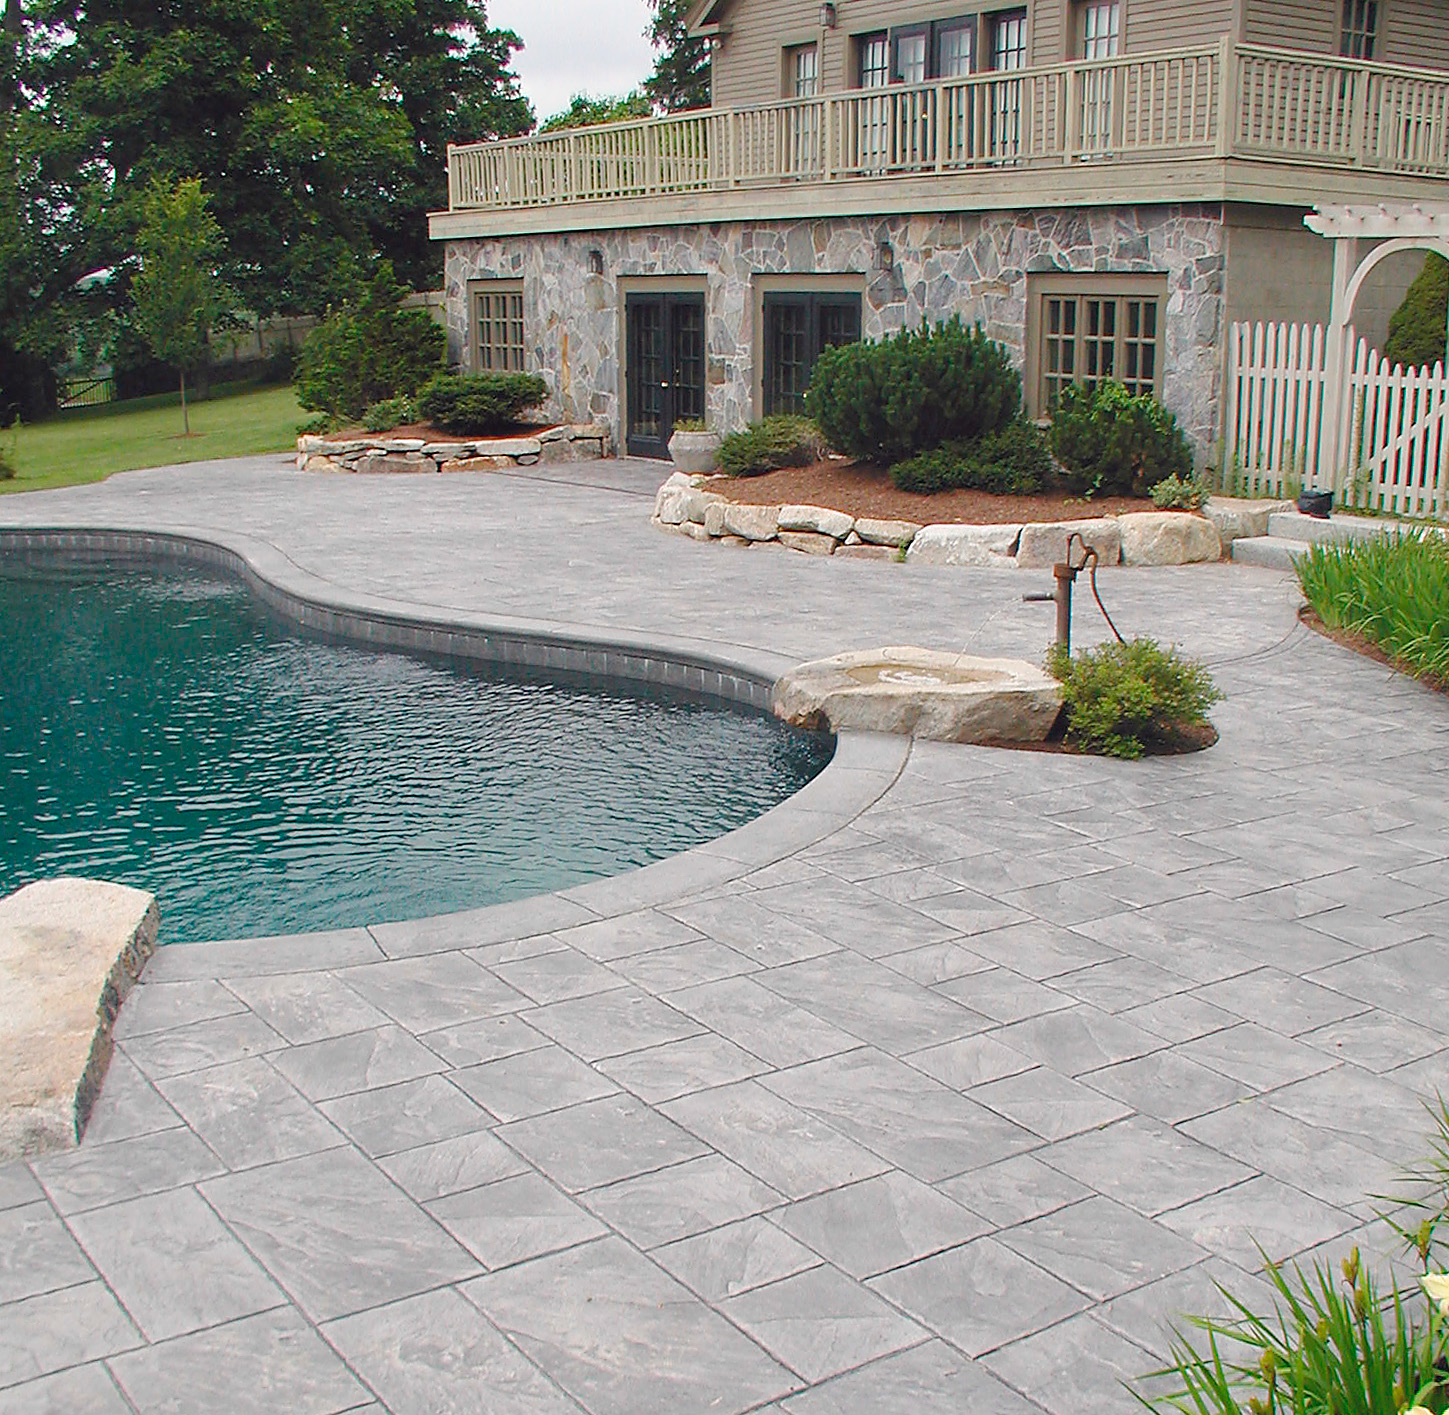 This pool deck has withstood Maine winters for seven years, and it still looks as good as new.